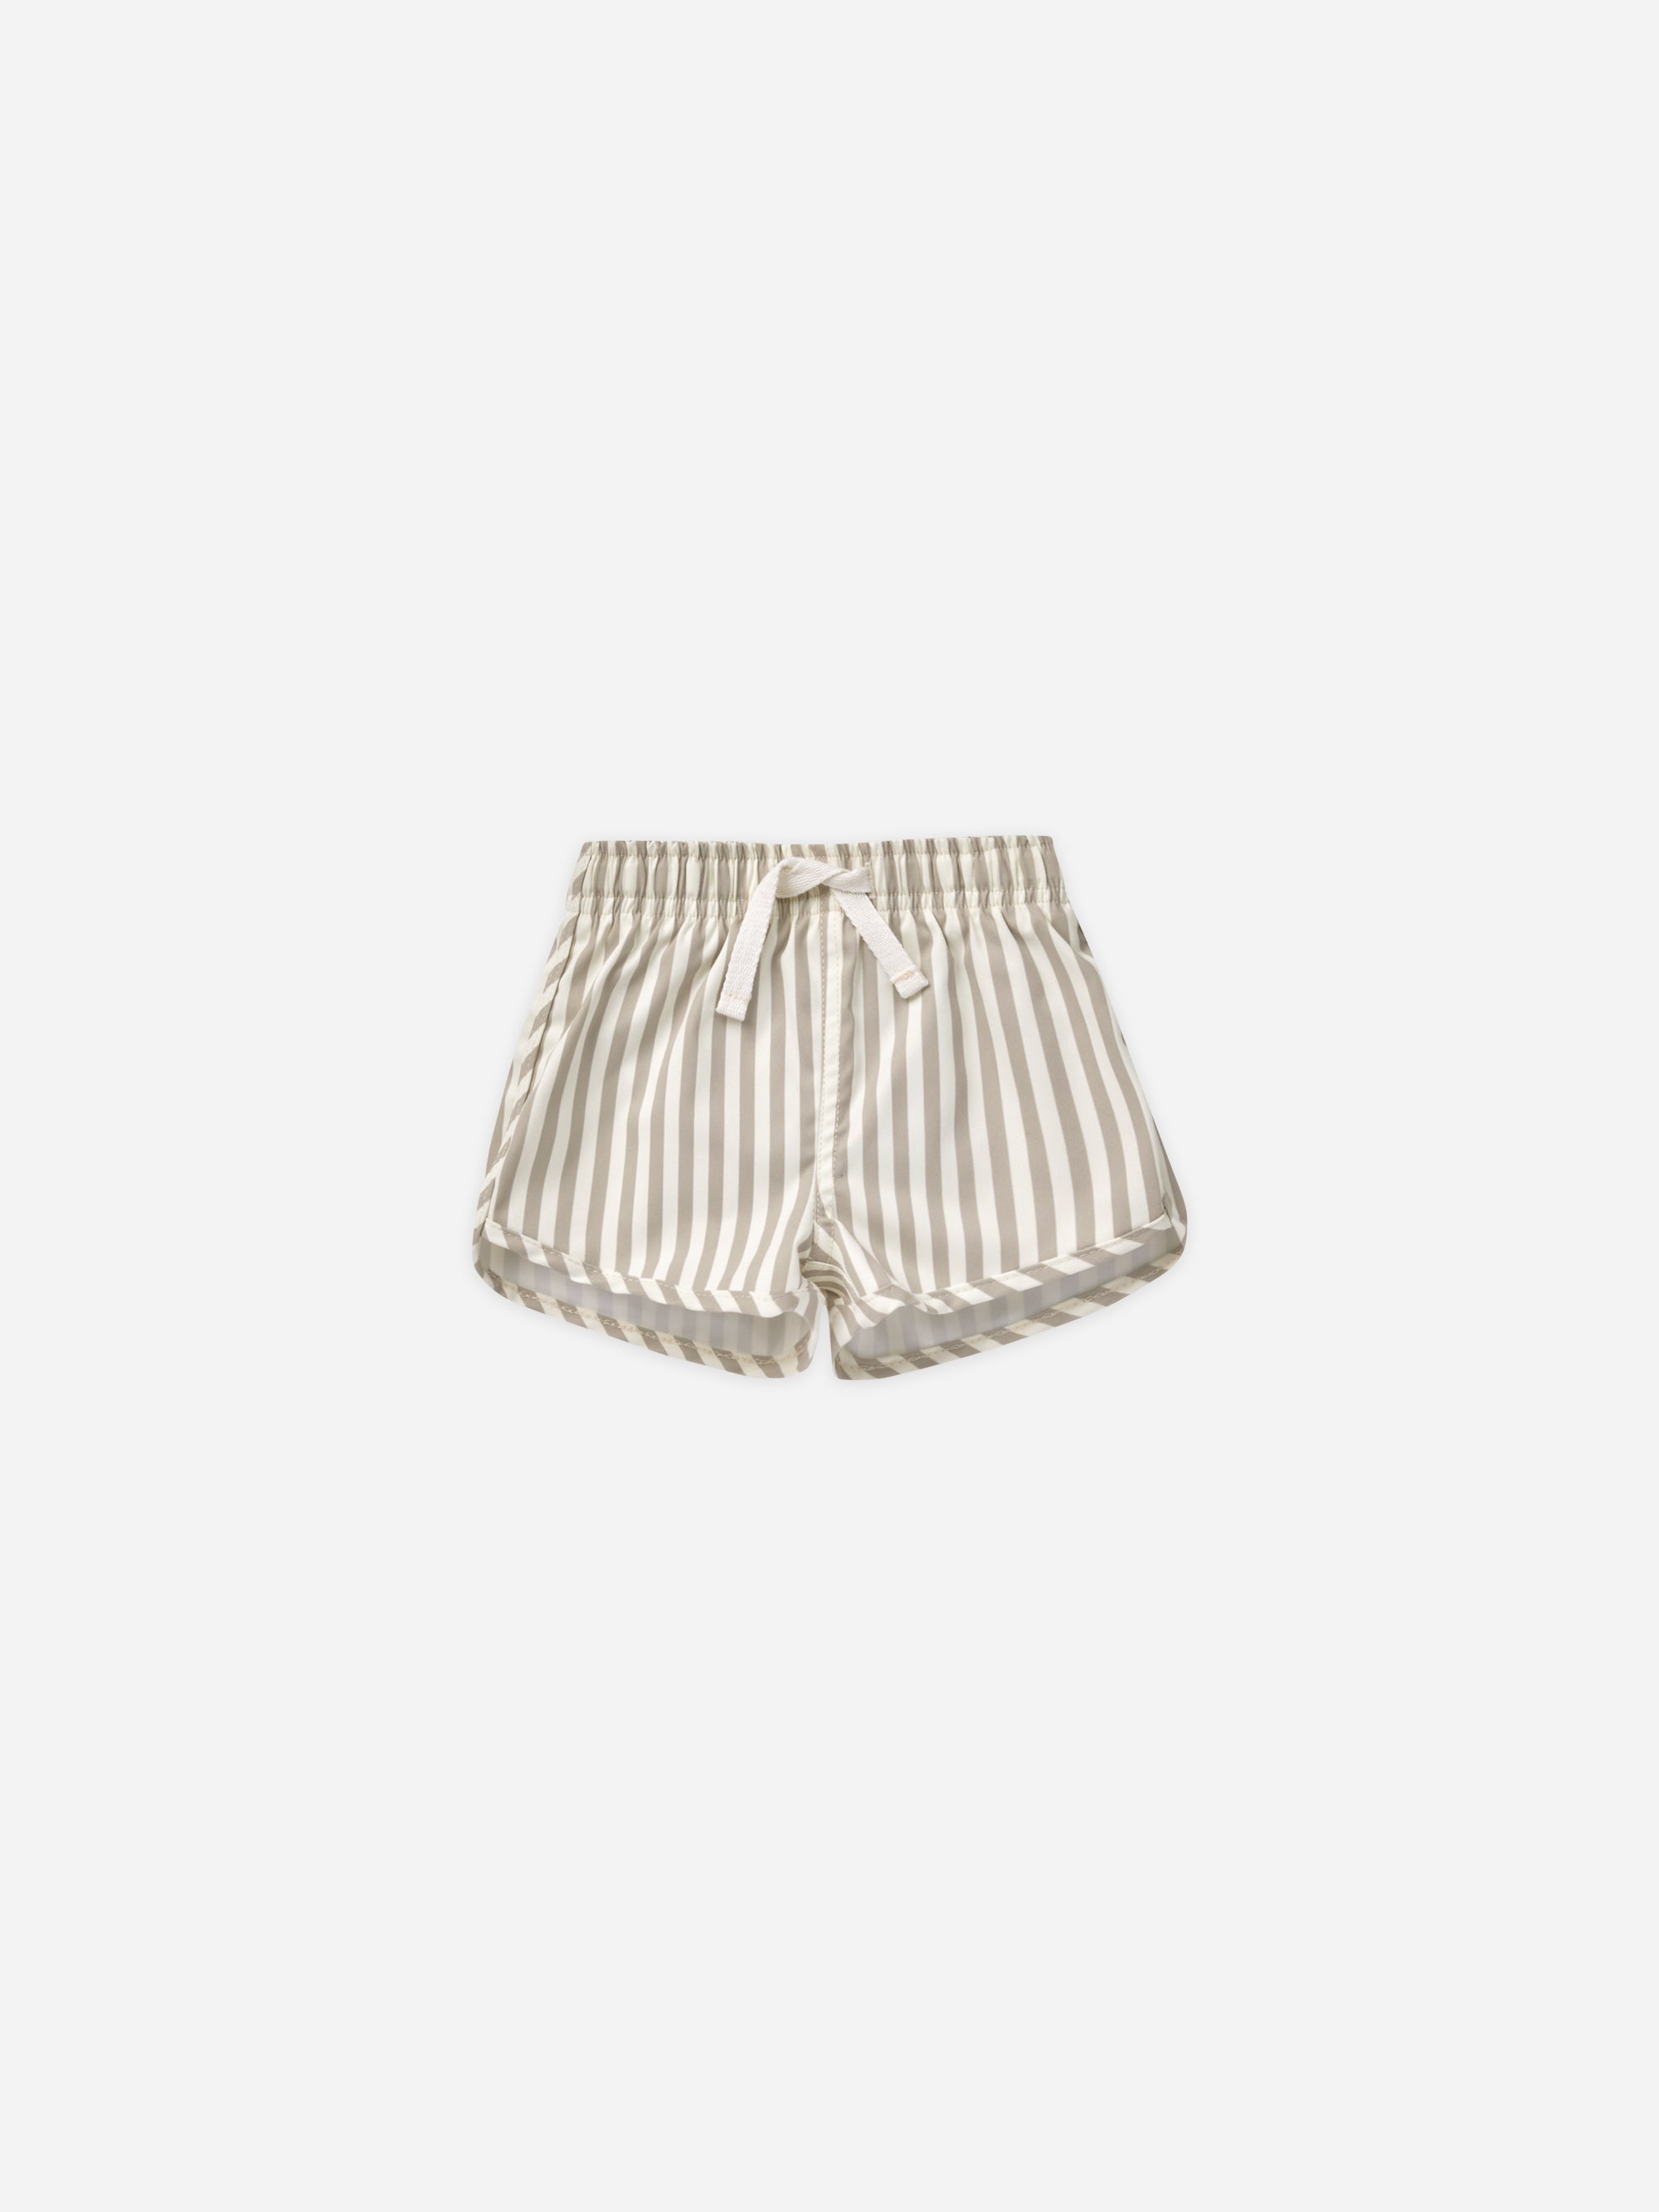 Boys Swim Short || Ash Stripe - Rylee + Cru | Kids Clothes | Trendy Baby Clothes | Modern Infant Outfits |